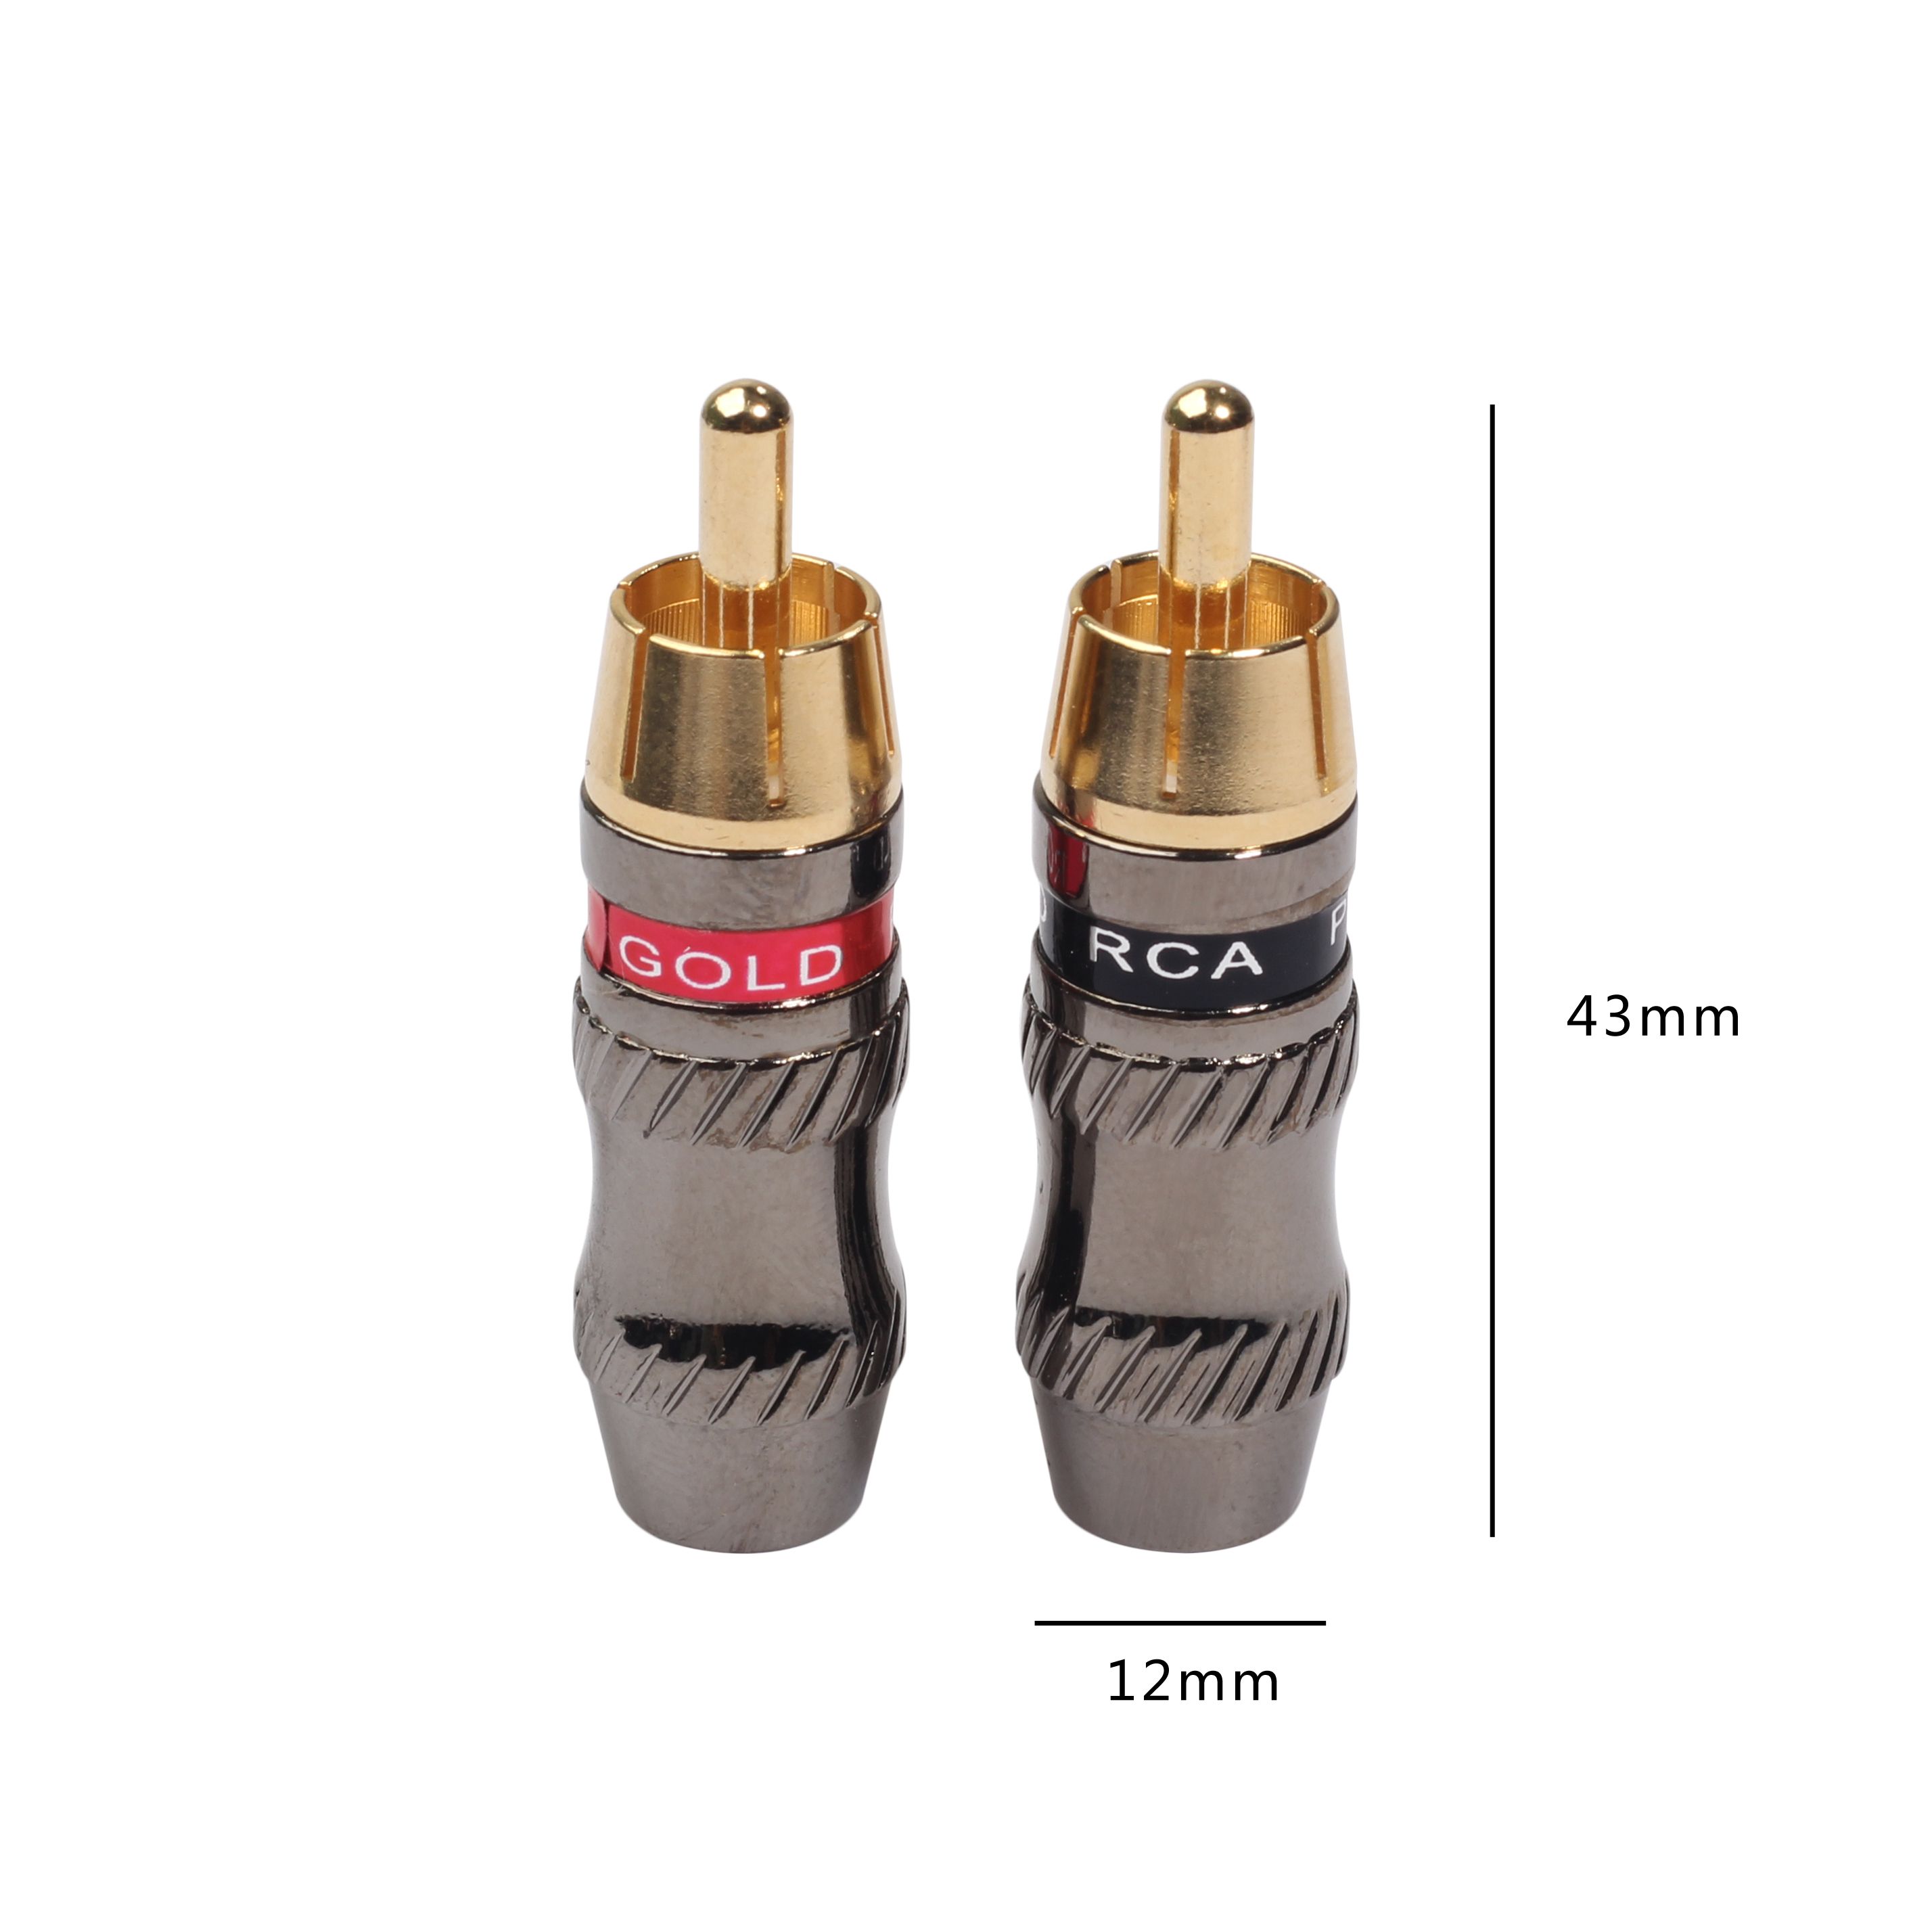 REXLIS-Gold-Plated-RCA-Male-Soldering-Plug-TR026-HIFI-Audio-Cable-RCA-Male-Video--Audio-Connector-Fo-1526964